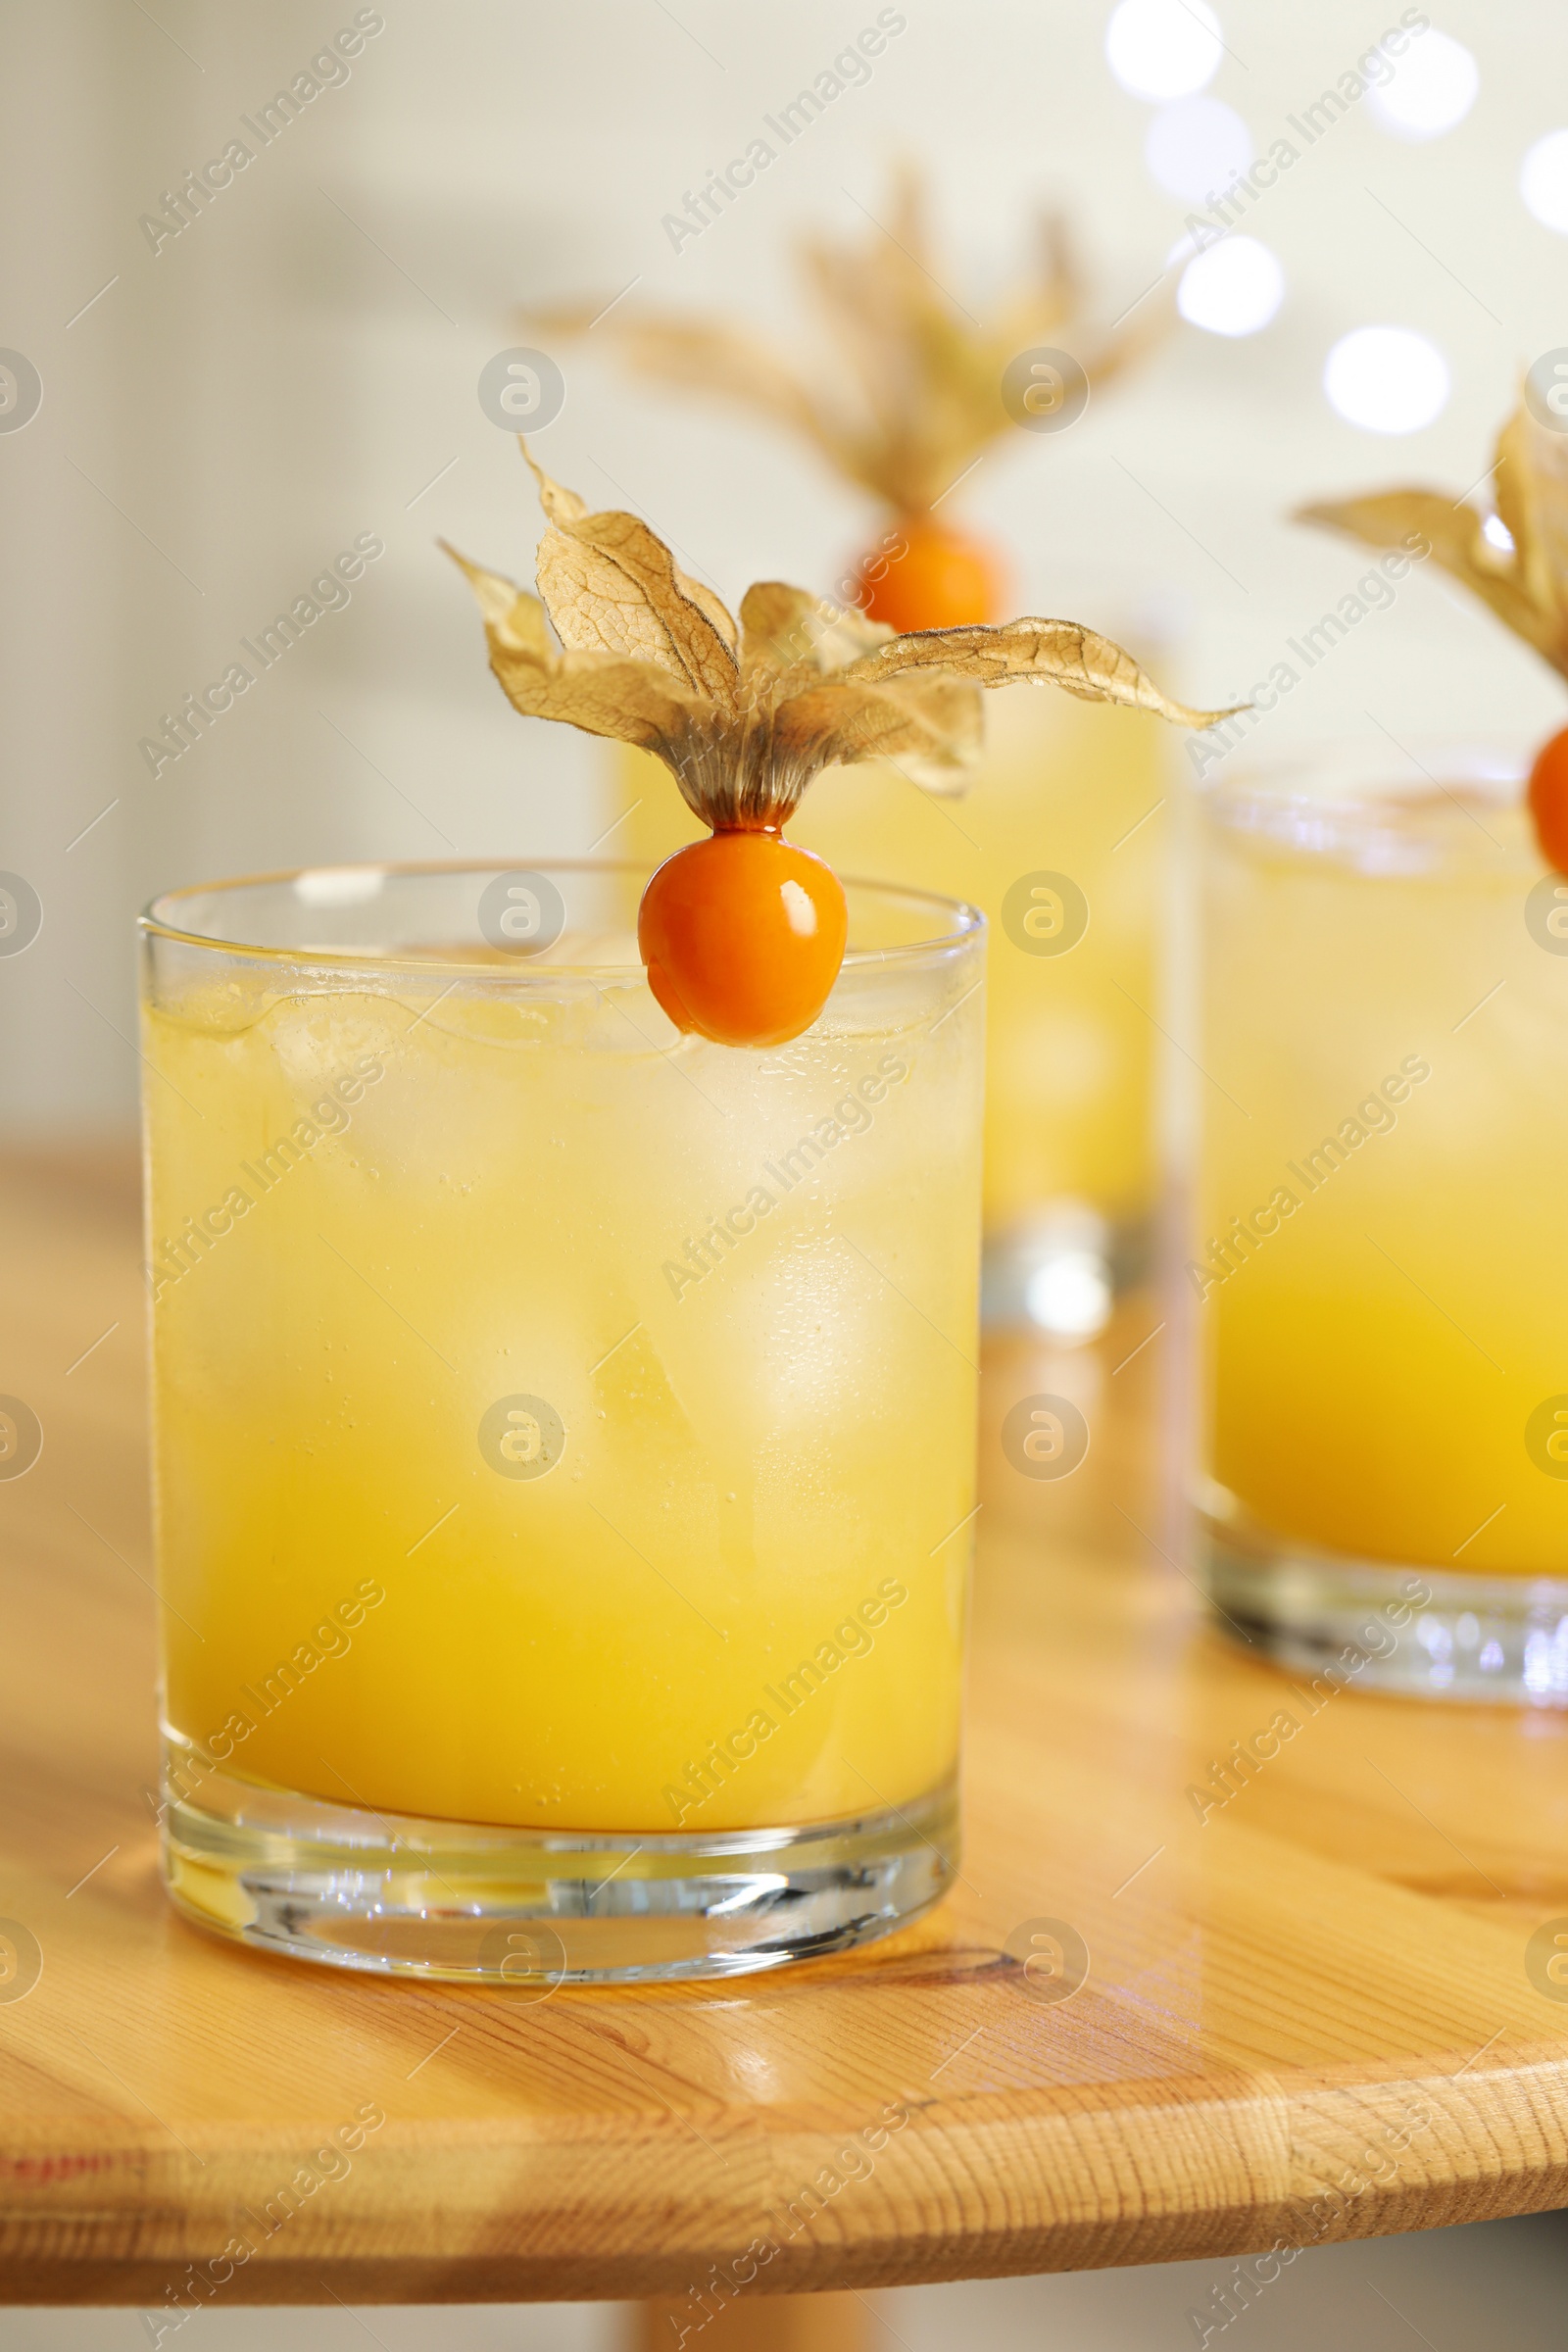 Photo of Refreshing cocktails decorated with physalis fruits on wooden table against blurred festive lights